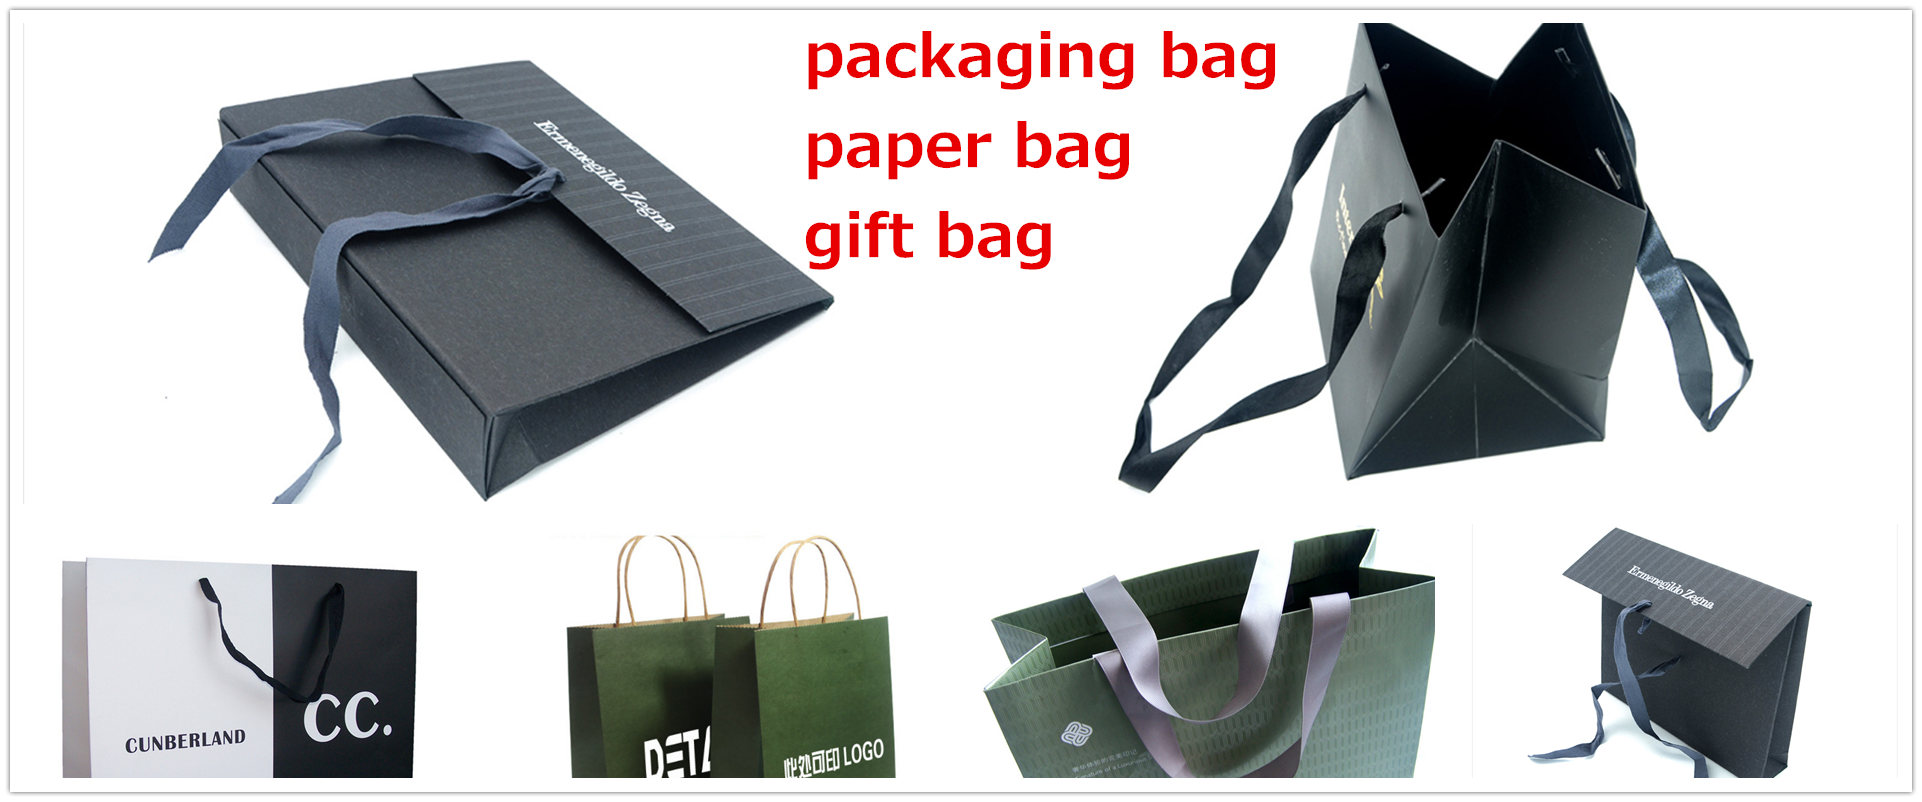 Shenzhen Lichun Display Co.,LTD - paper packaging and POS material producer